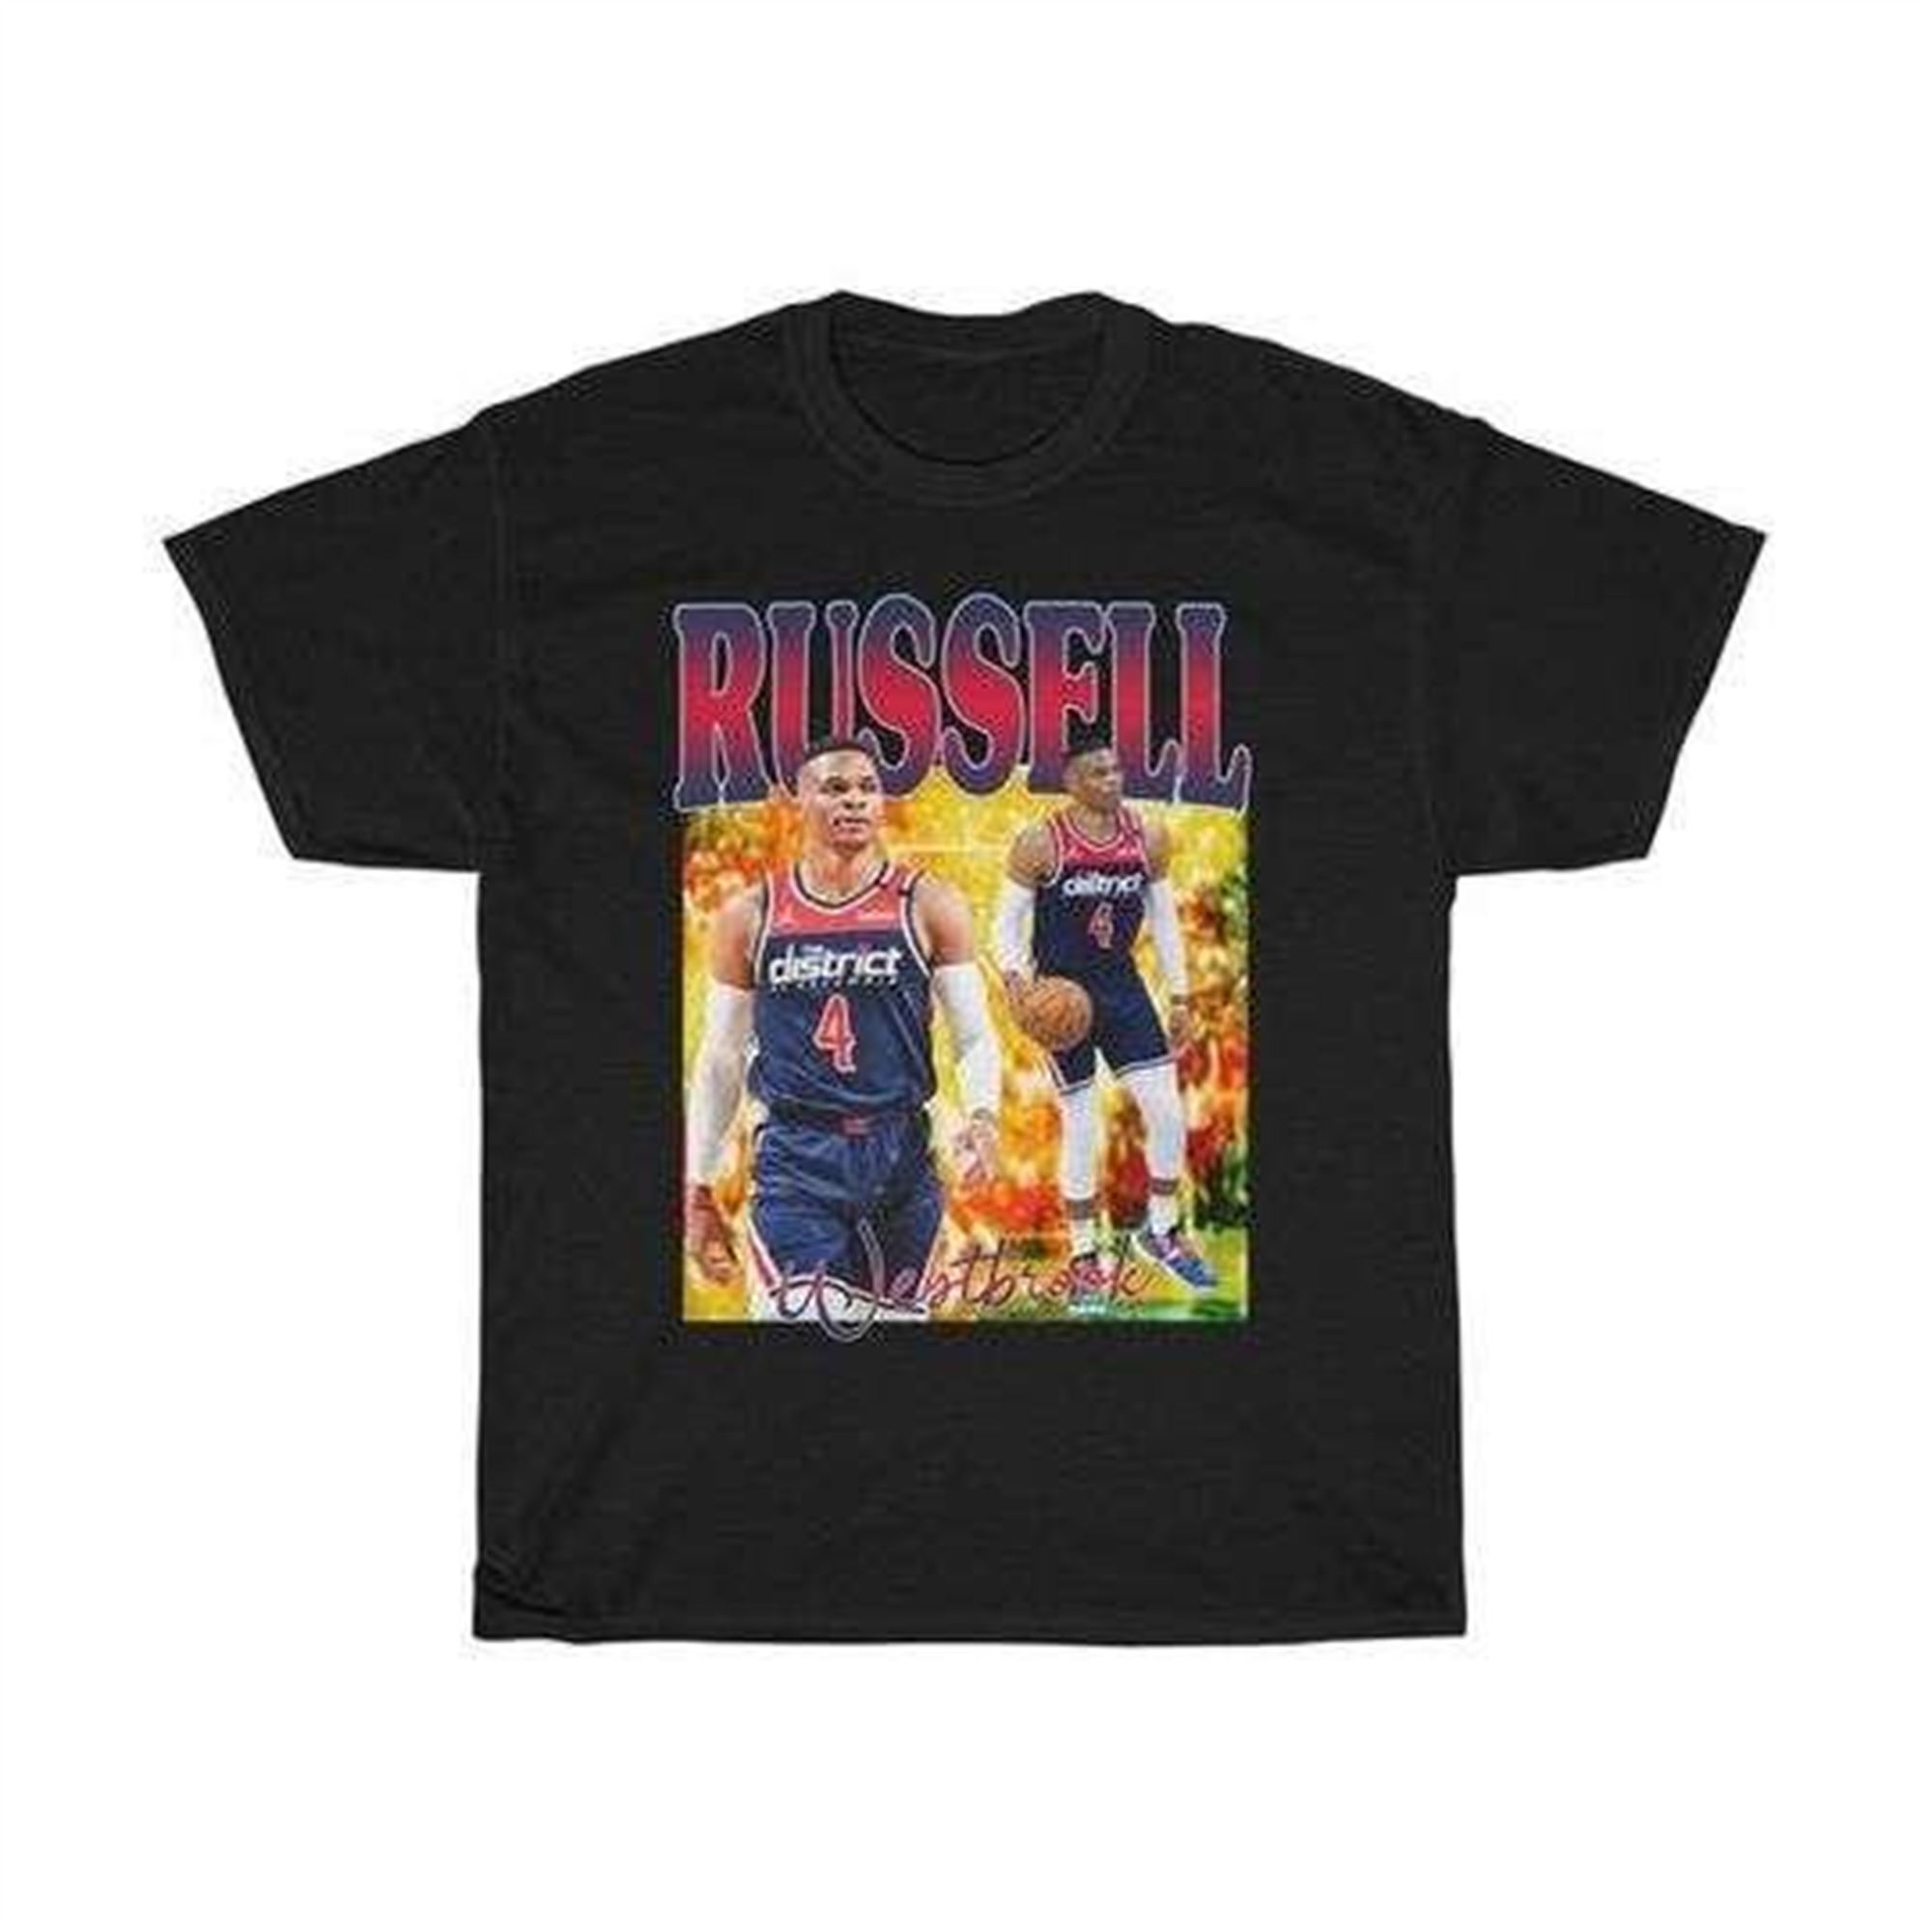 Russell Westbrook T Shirt Size Up To 5xl